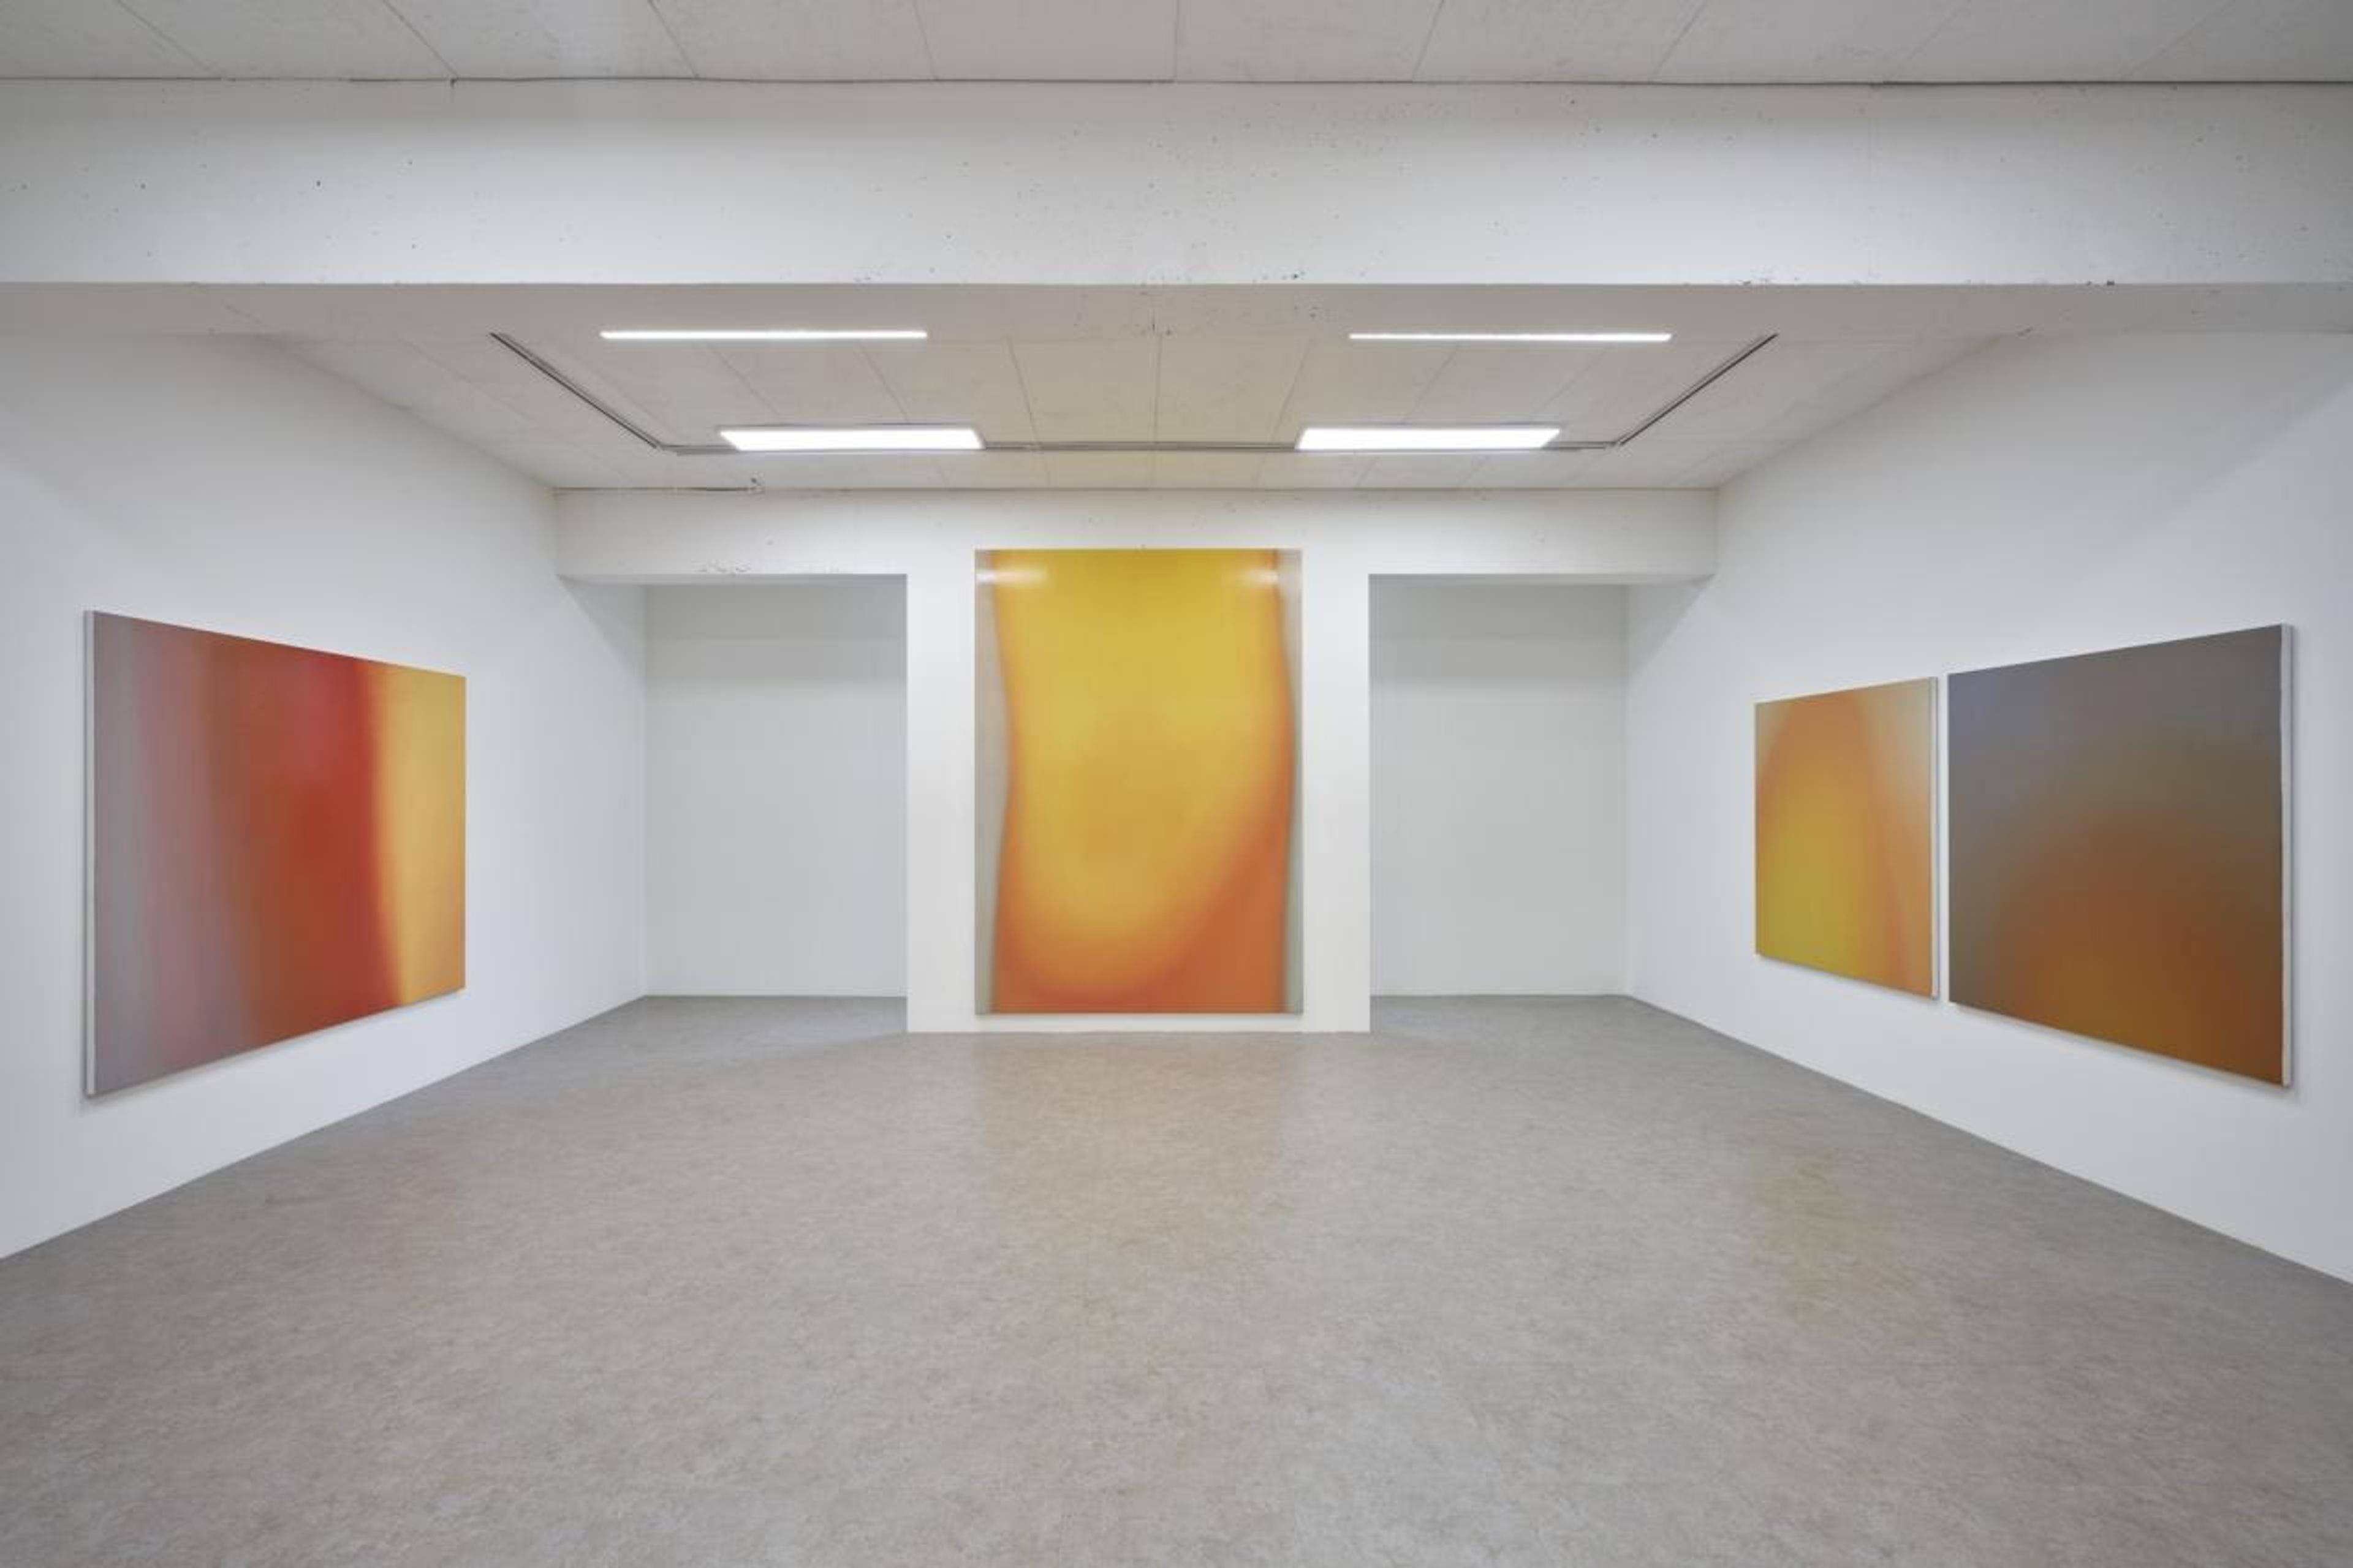 Installation view of Keem Jiyoungs 2020-21 solo show at Wess. Courtesy of Wess.